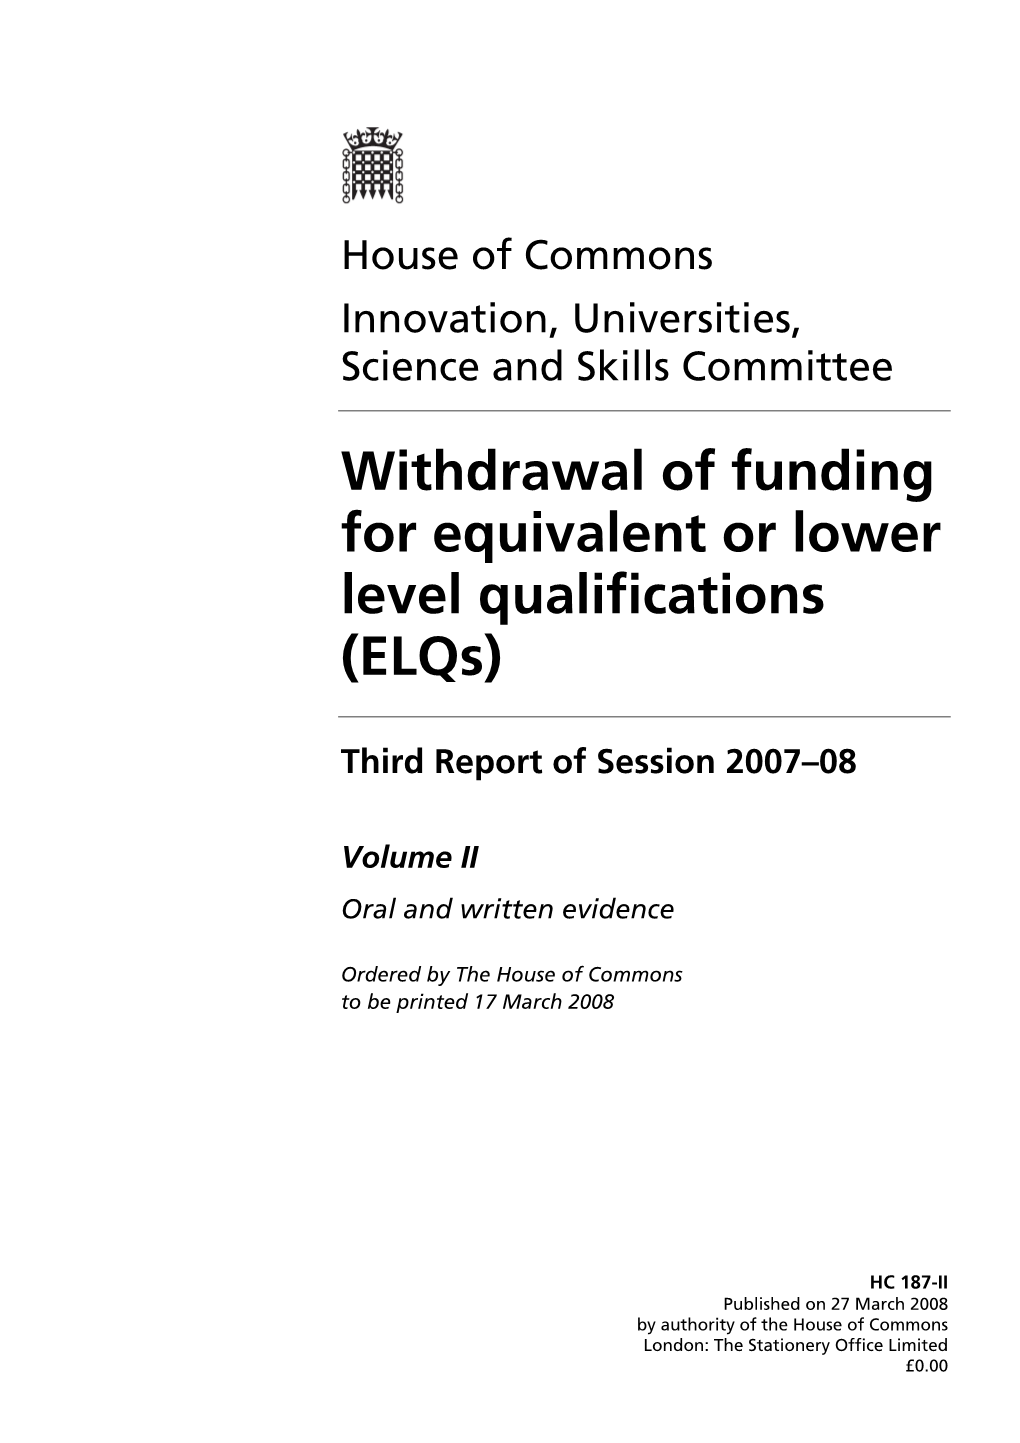 Withdrawal of Funding for Equivalent Or Lower Level Qualifications (Elqs)